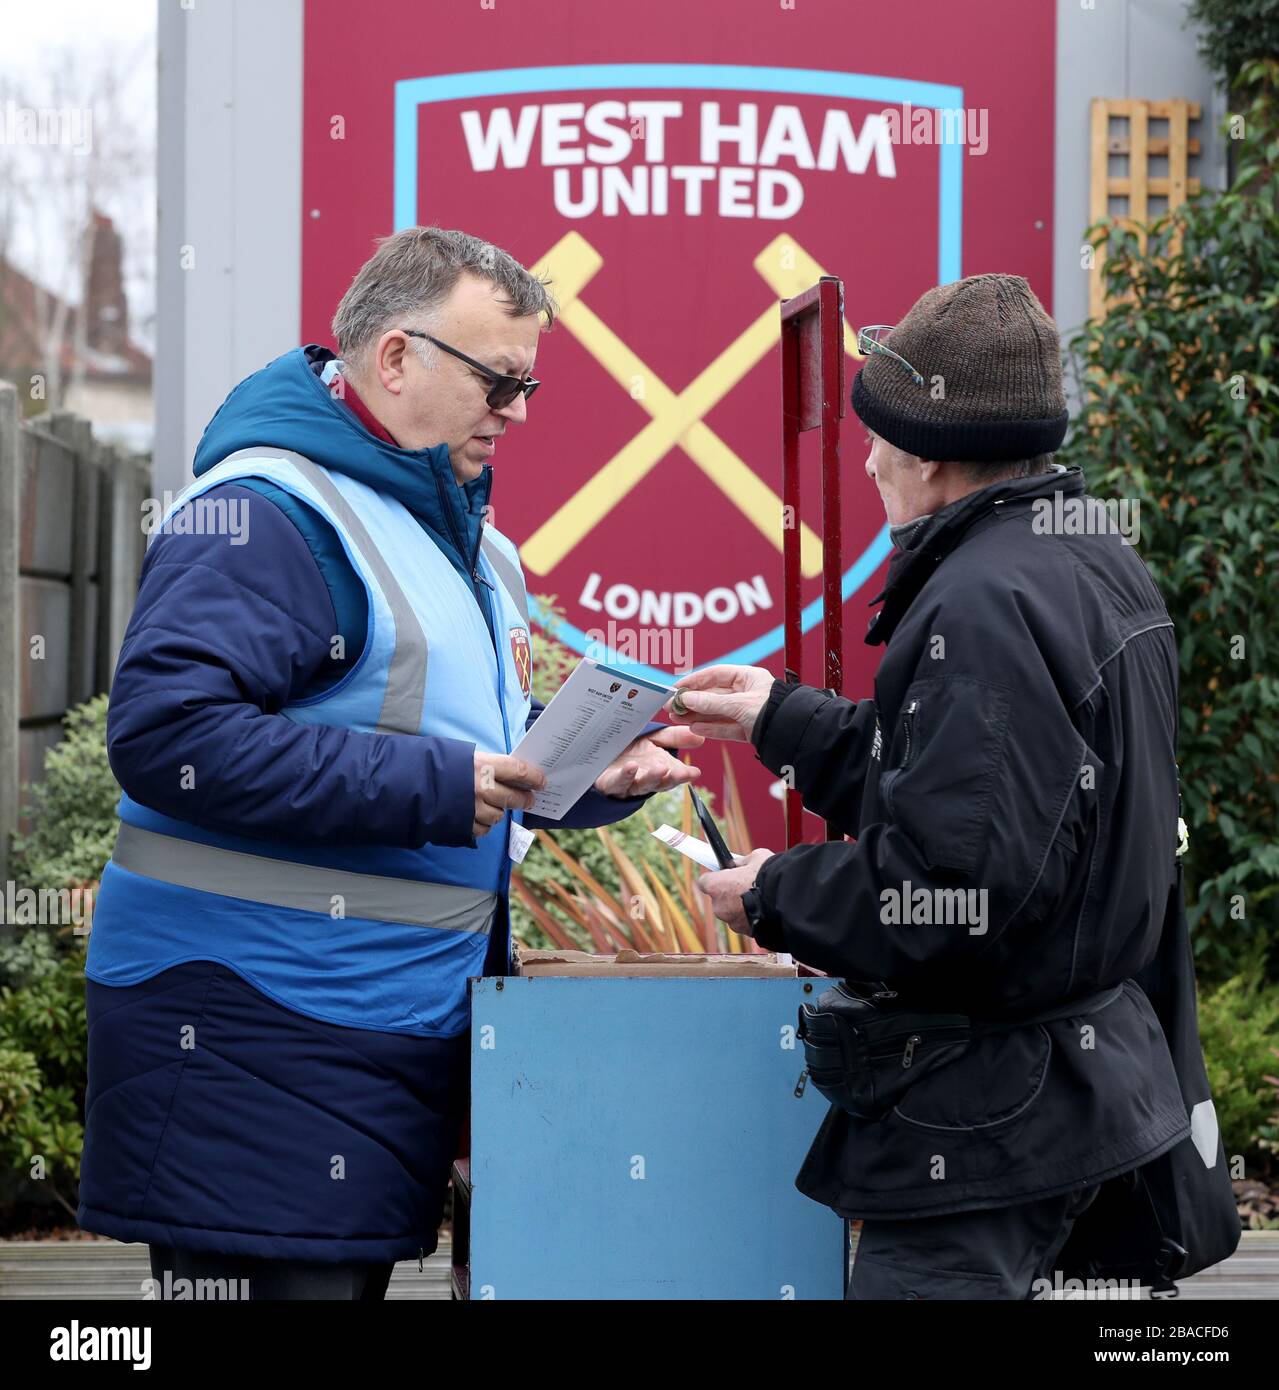 West Ham Women fan buys a programme ahead of the game Stock Photo